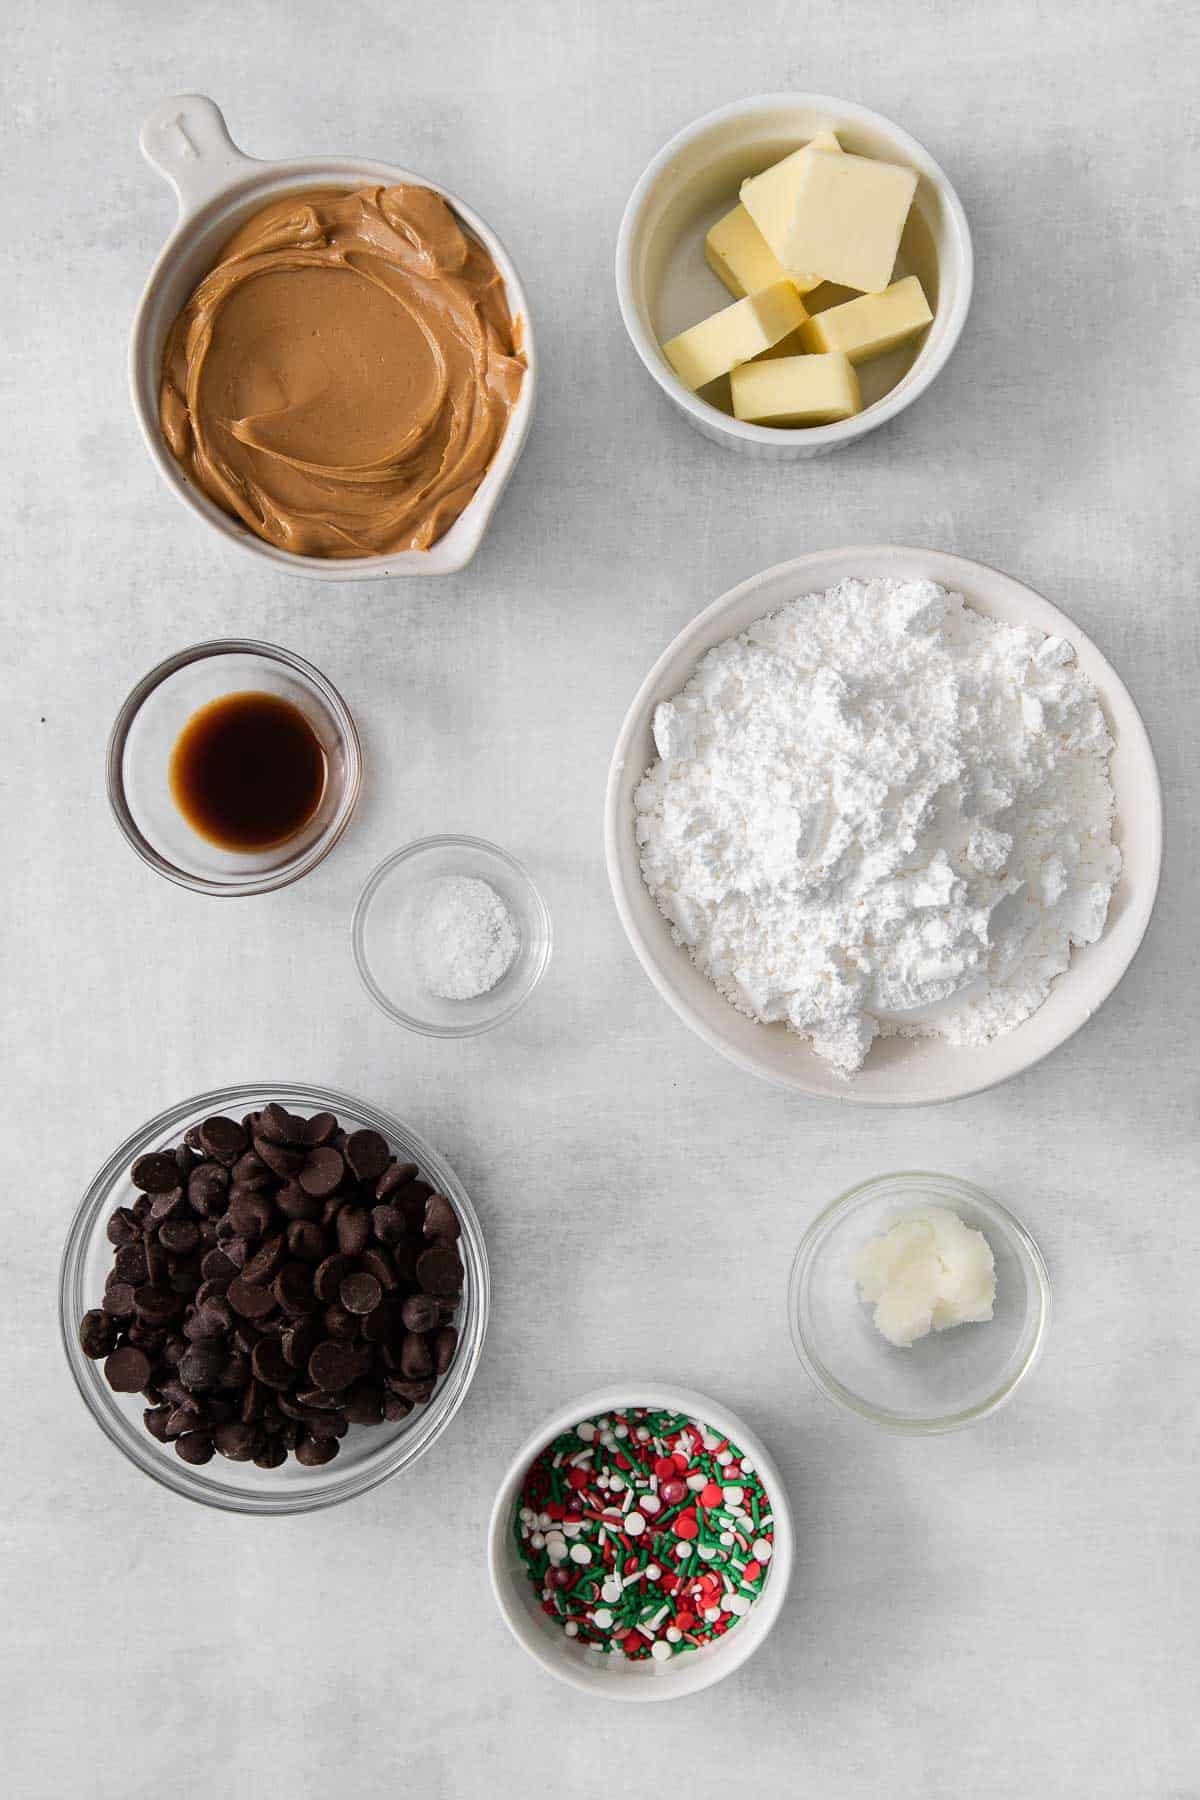 several bowls with ingredients for peanut butter bars - cream peanut butter, powdered sugar, chocolate chips, vanilla extract, salt.